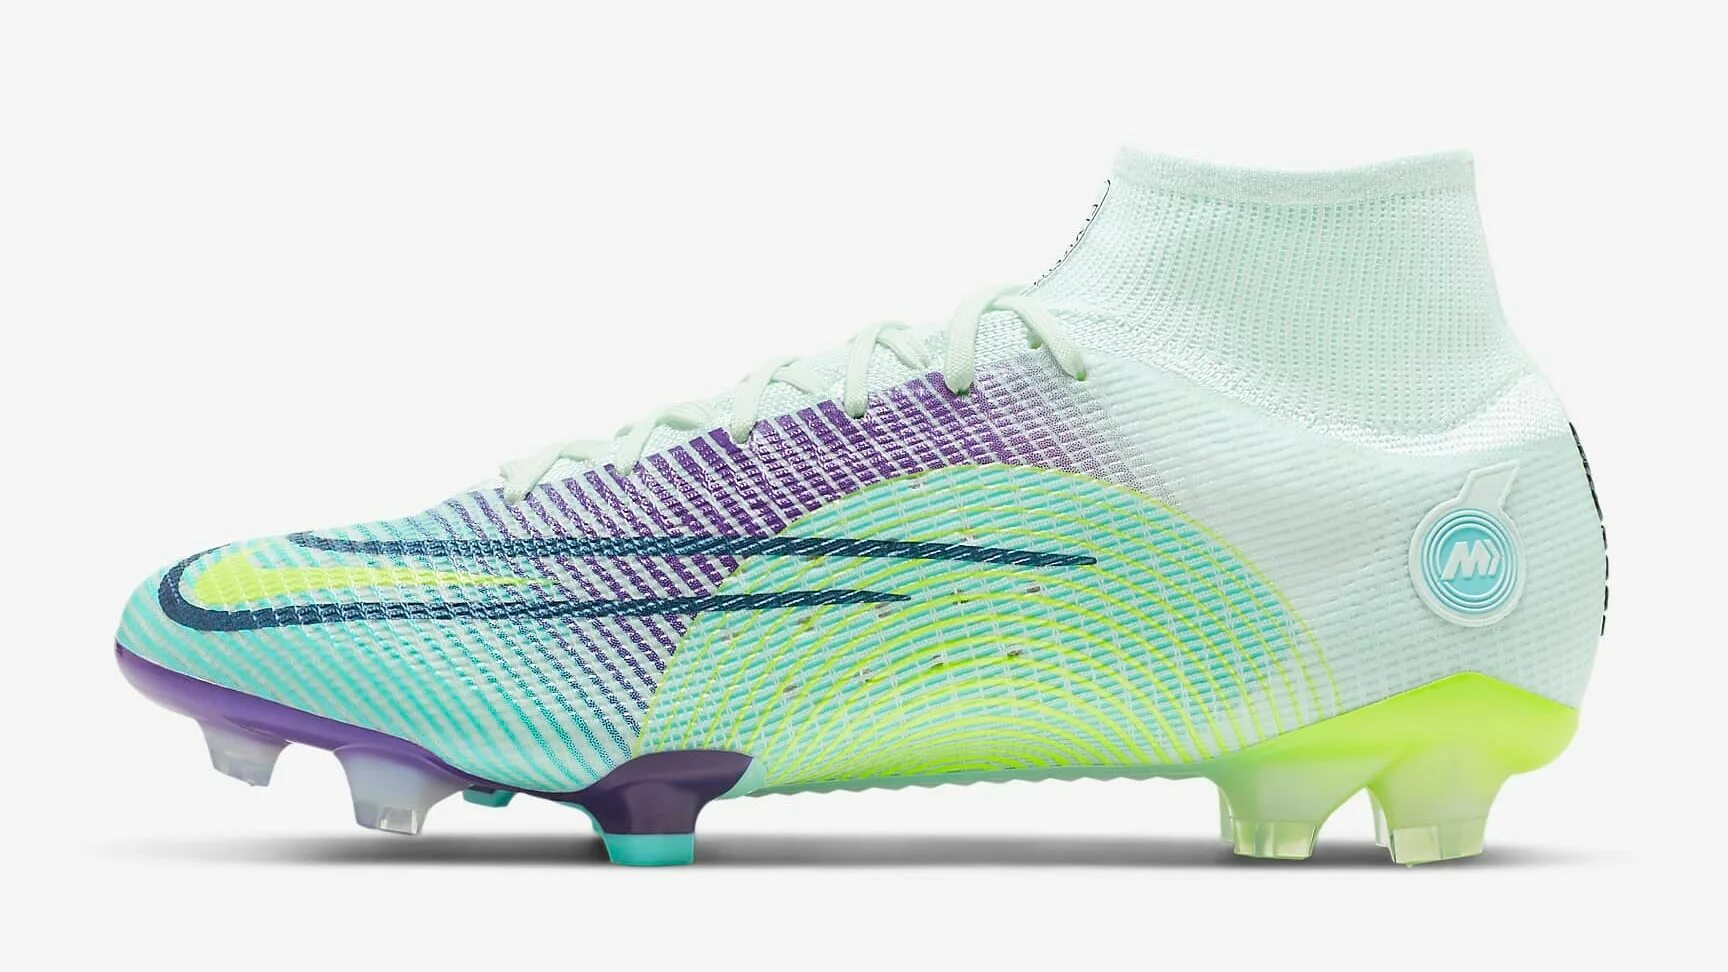 Nike Mercurial Superfly 7 Elite MDS FG "Dream Speed". Nike Mercurial Vapor 14 Elite FG 'Dream Speed - barely Green Electro Purple'. Mbappe бутсы 2022 Gold.